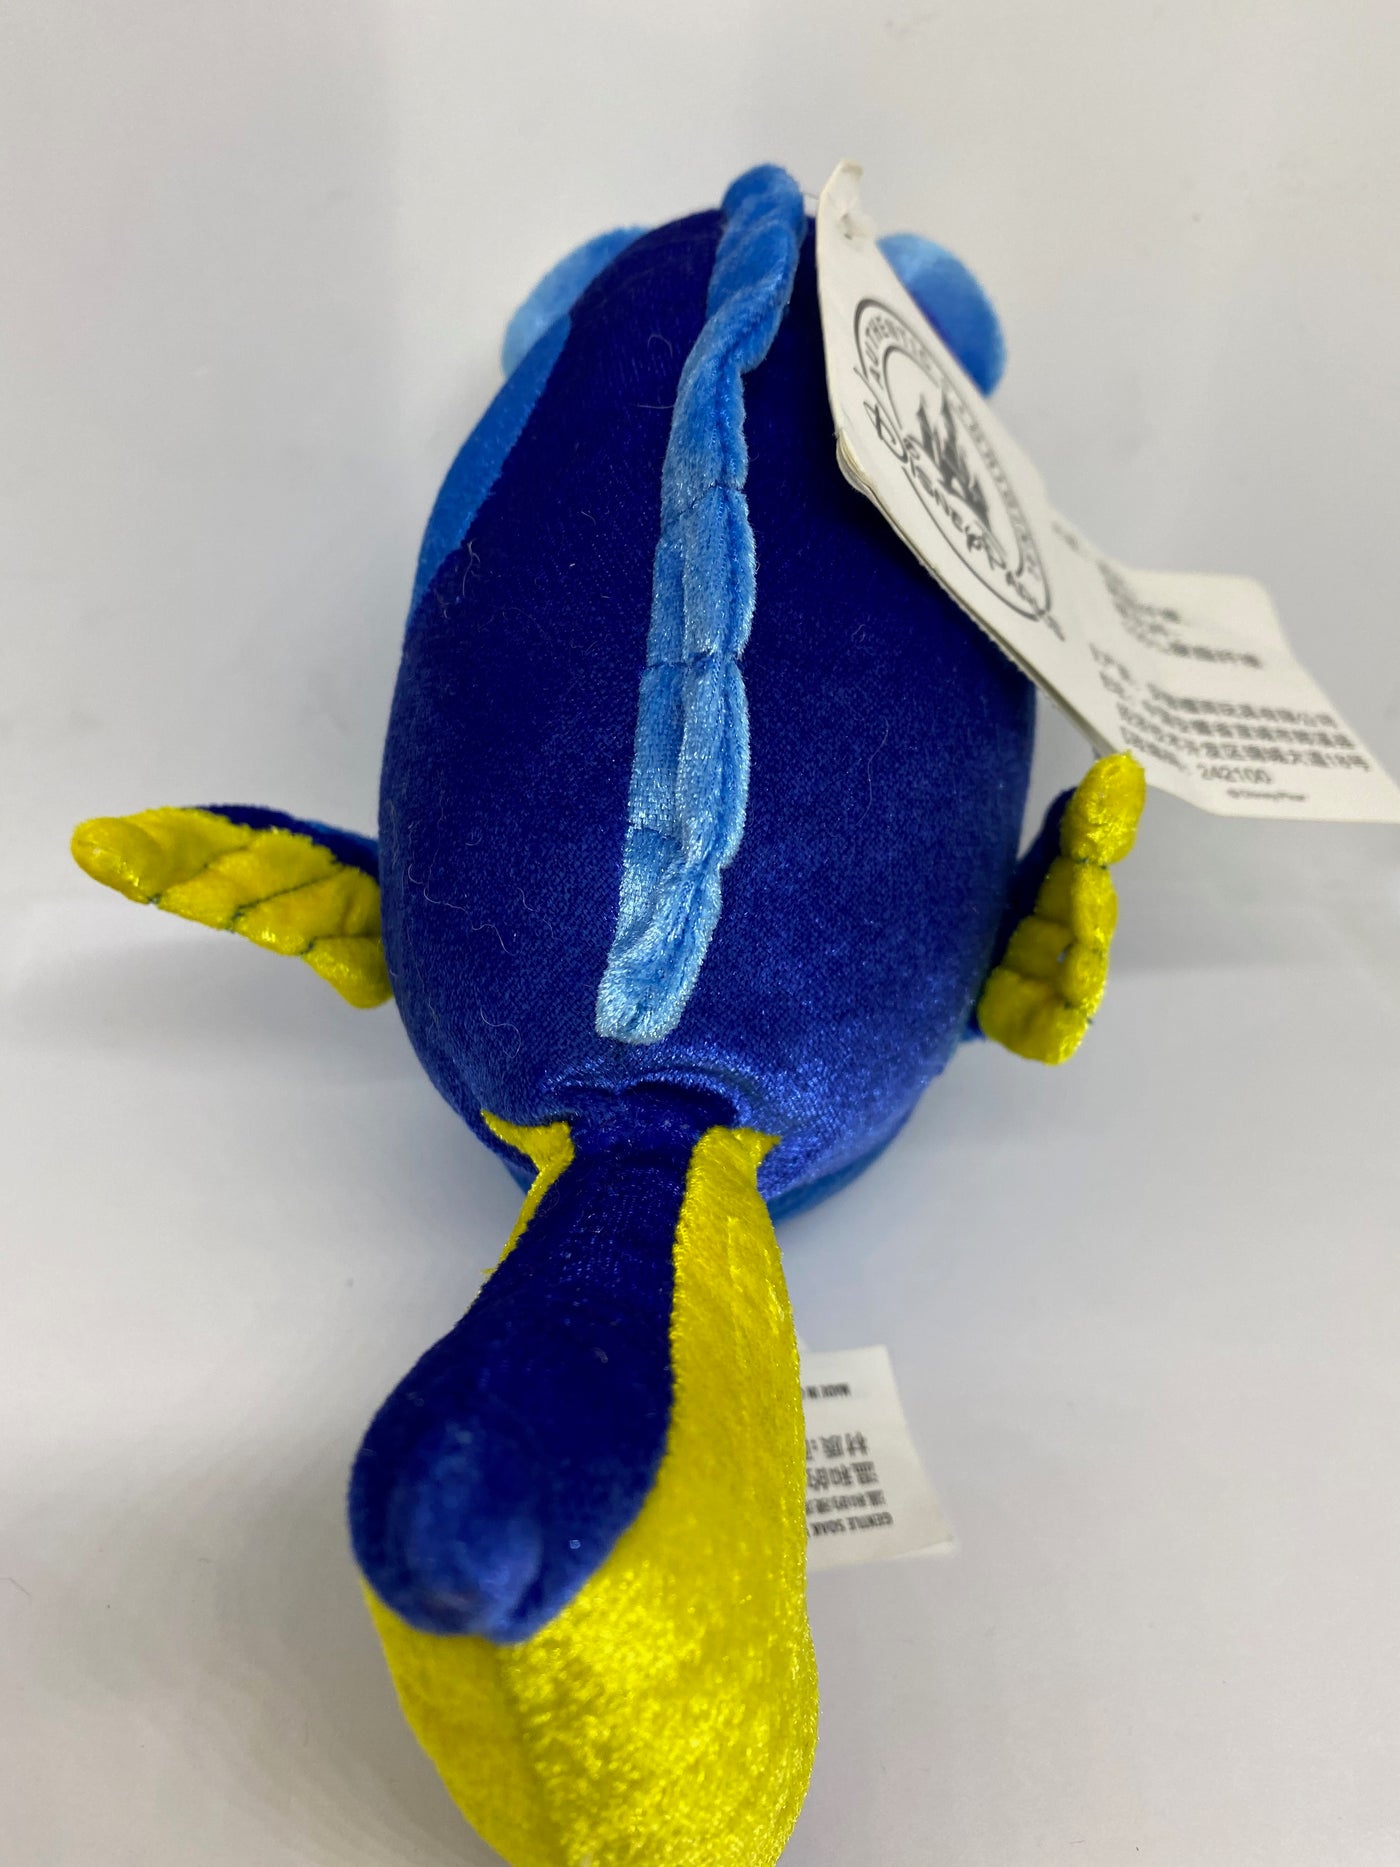 Disney Parks Finding Nemo 9inc Dory Bean Bag Plush New with Tags